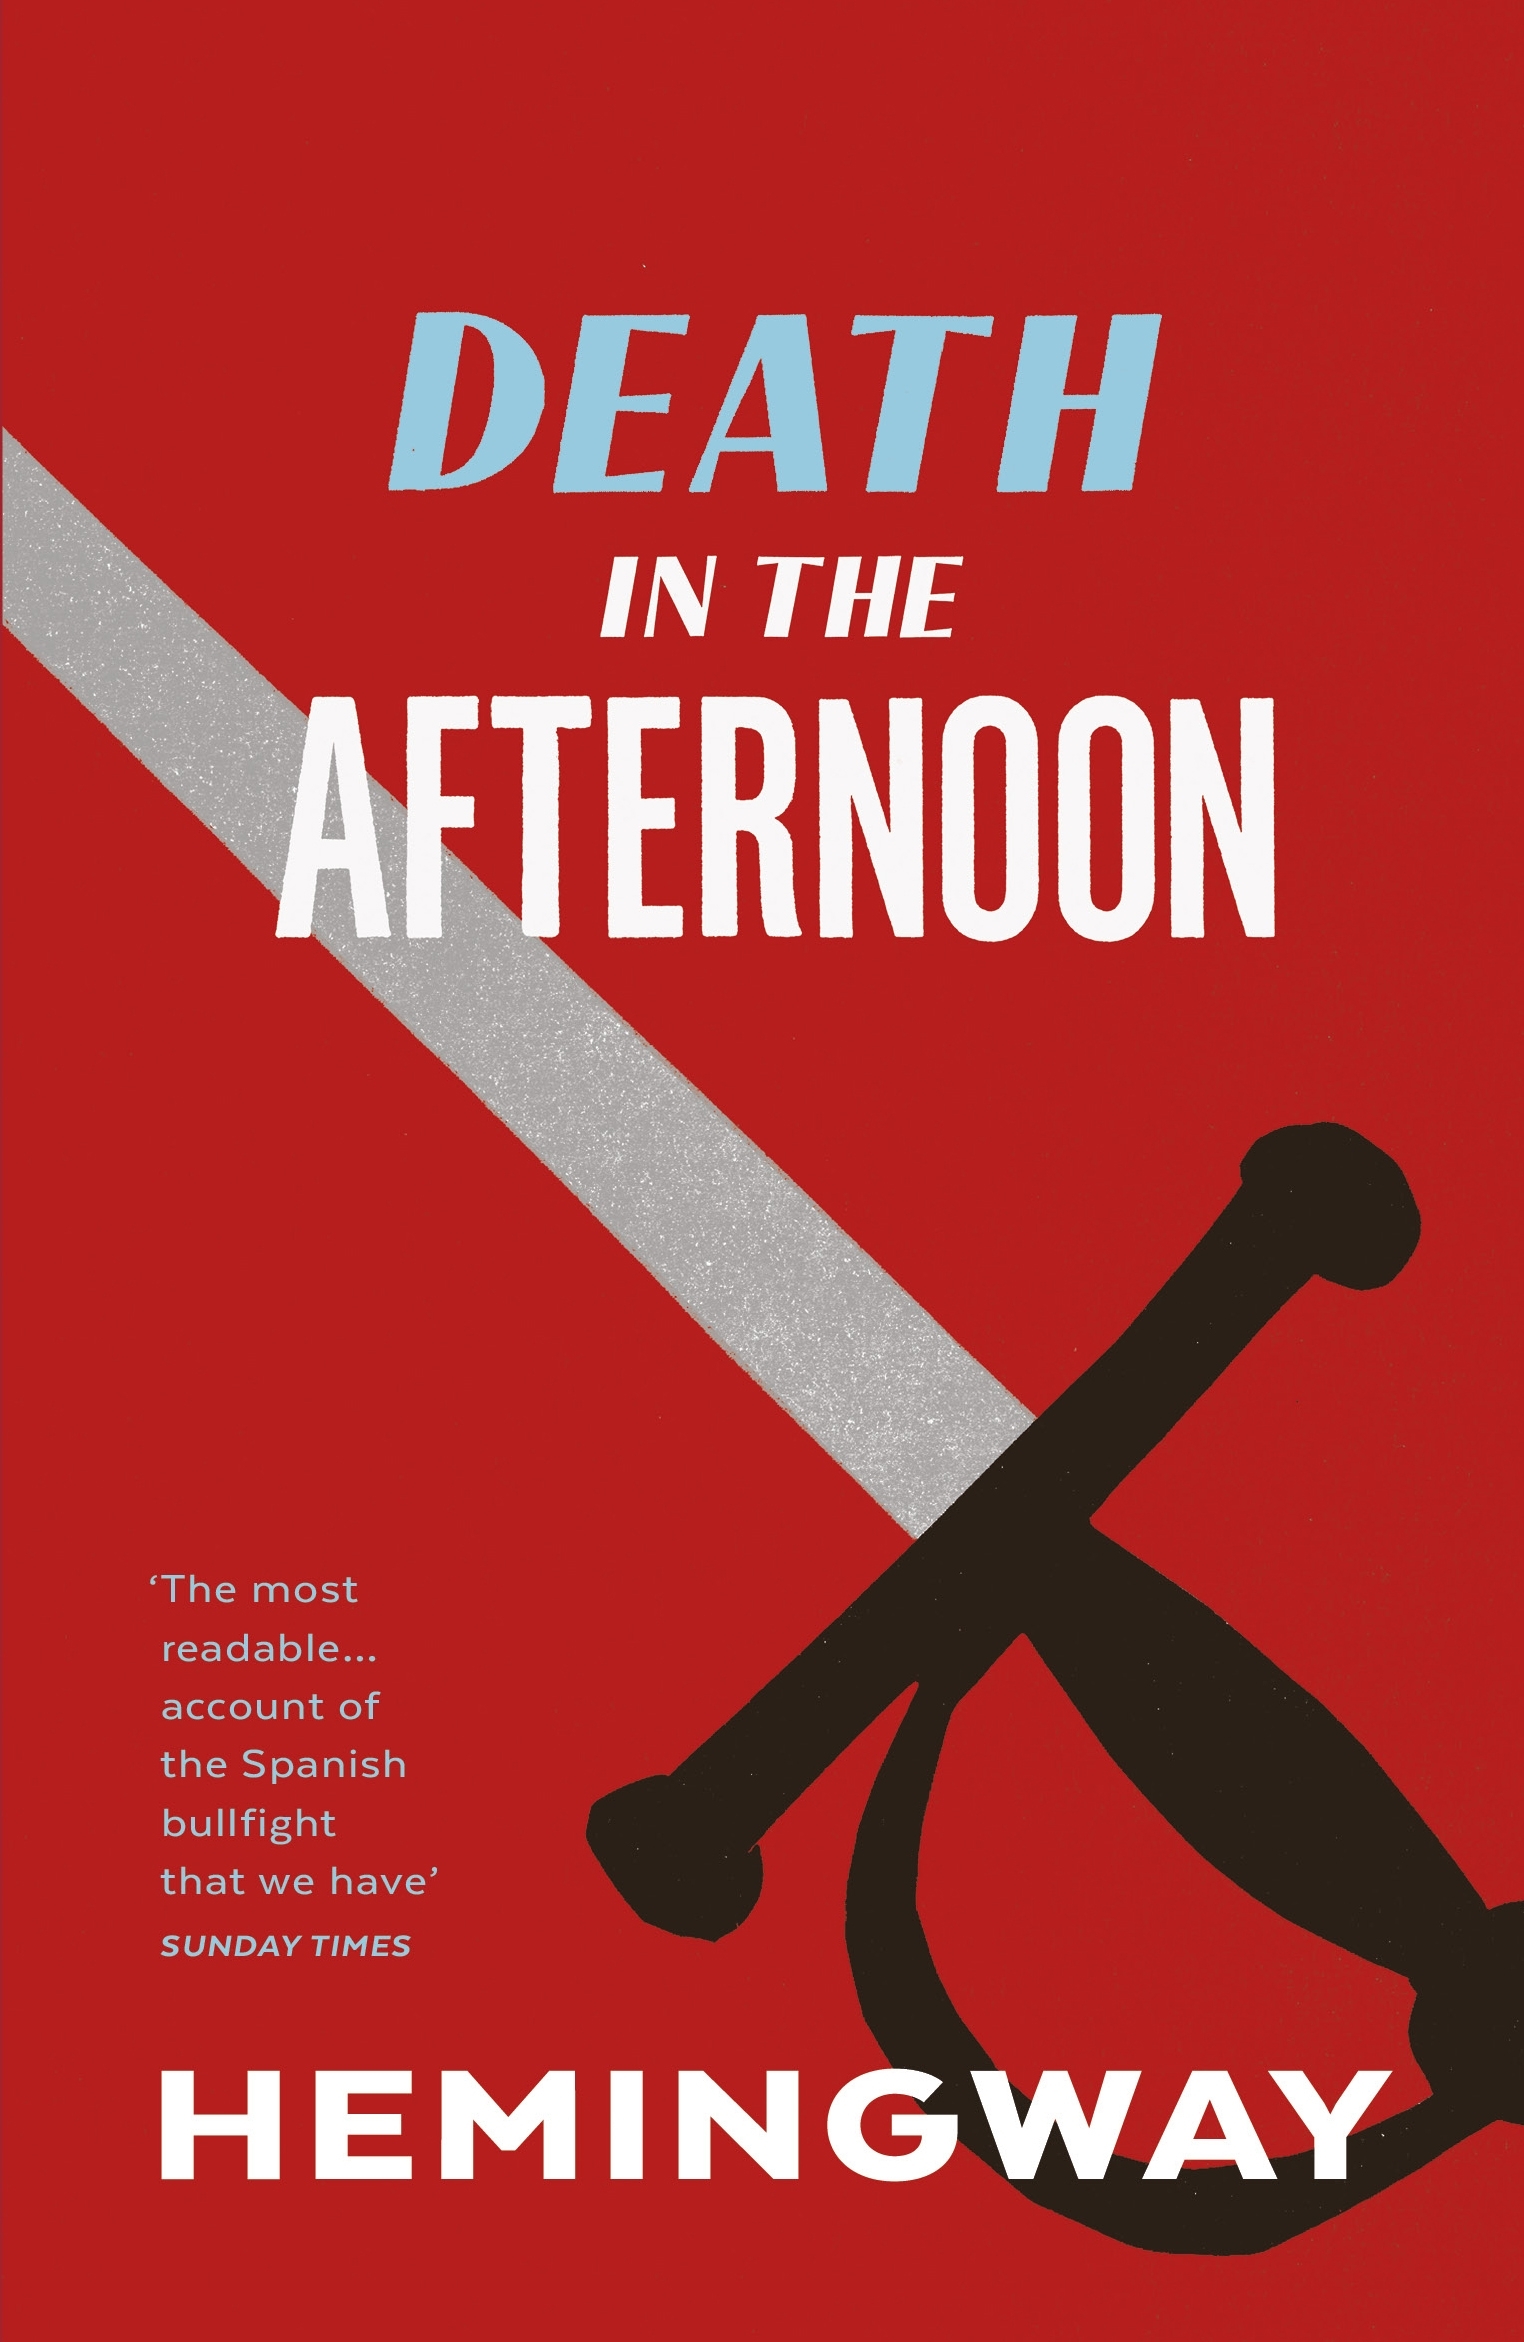 Death In The Afternoon by Ernest Hemingway - Penguin Books Australia